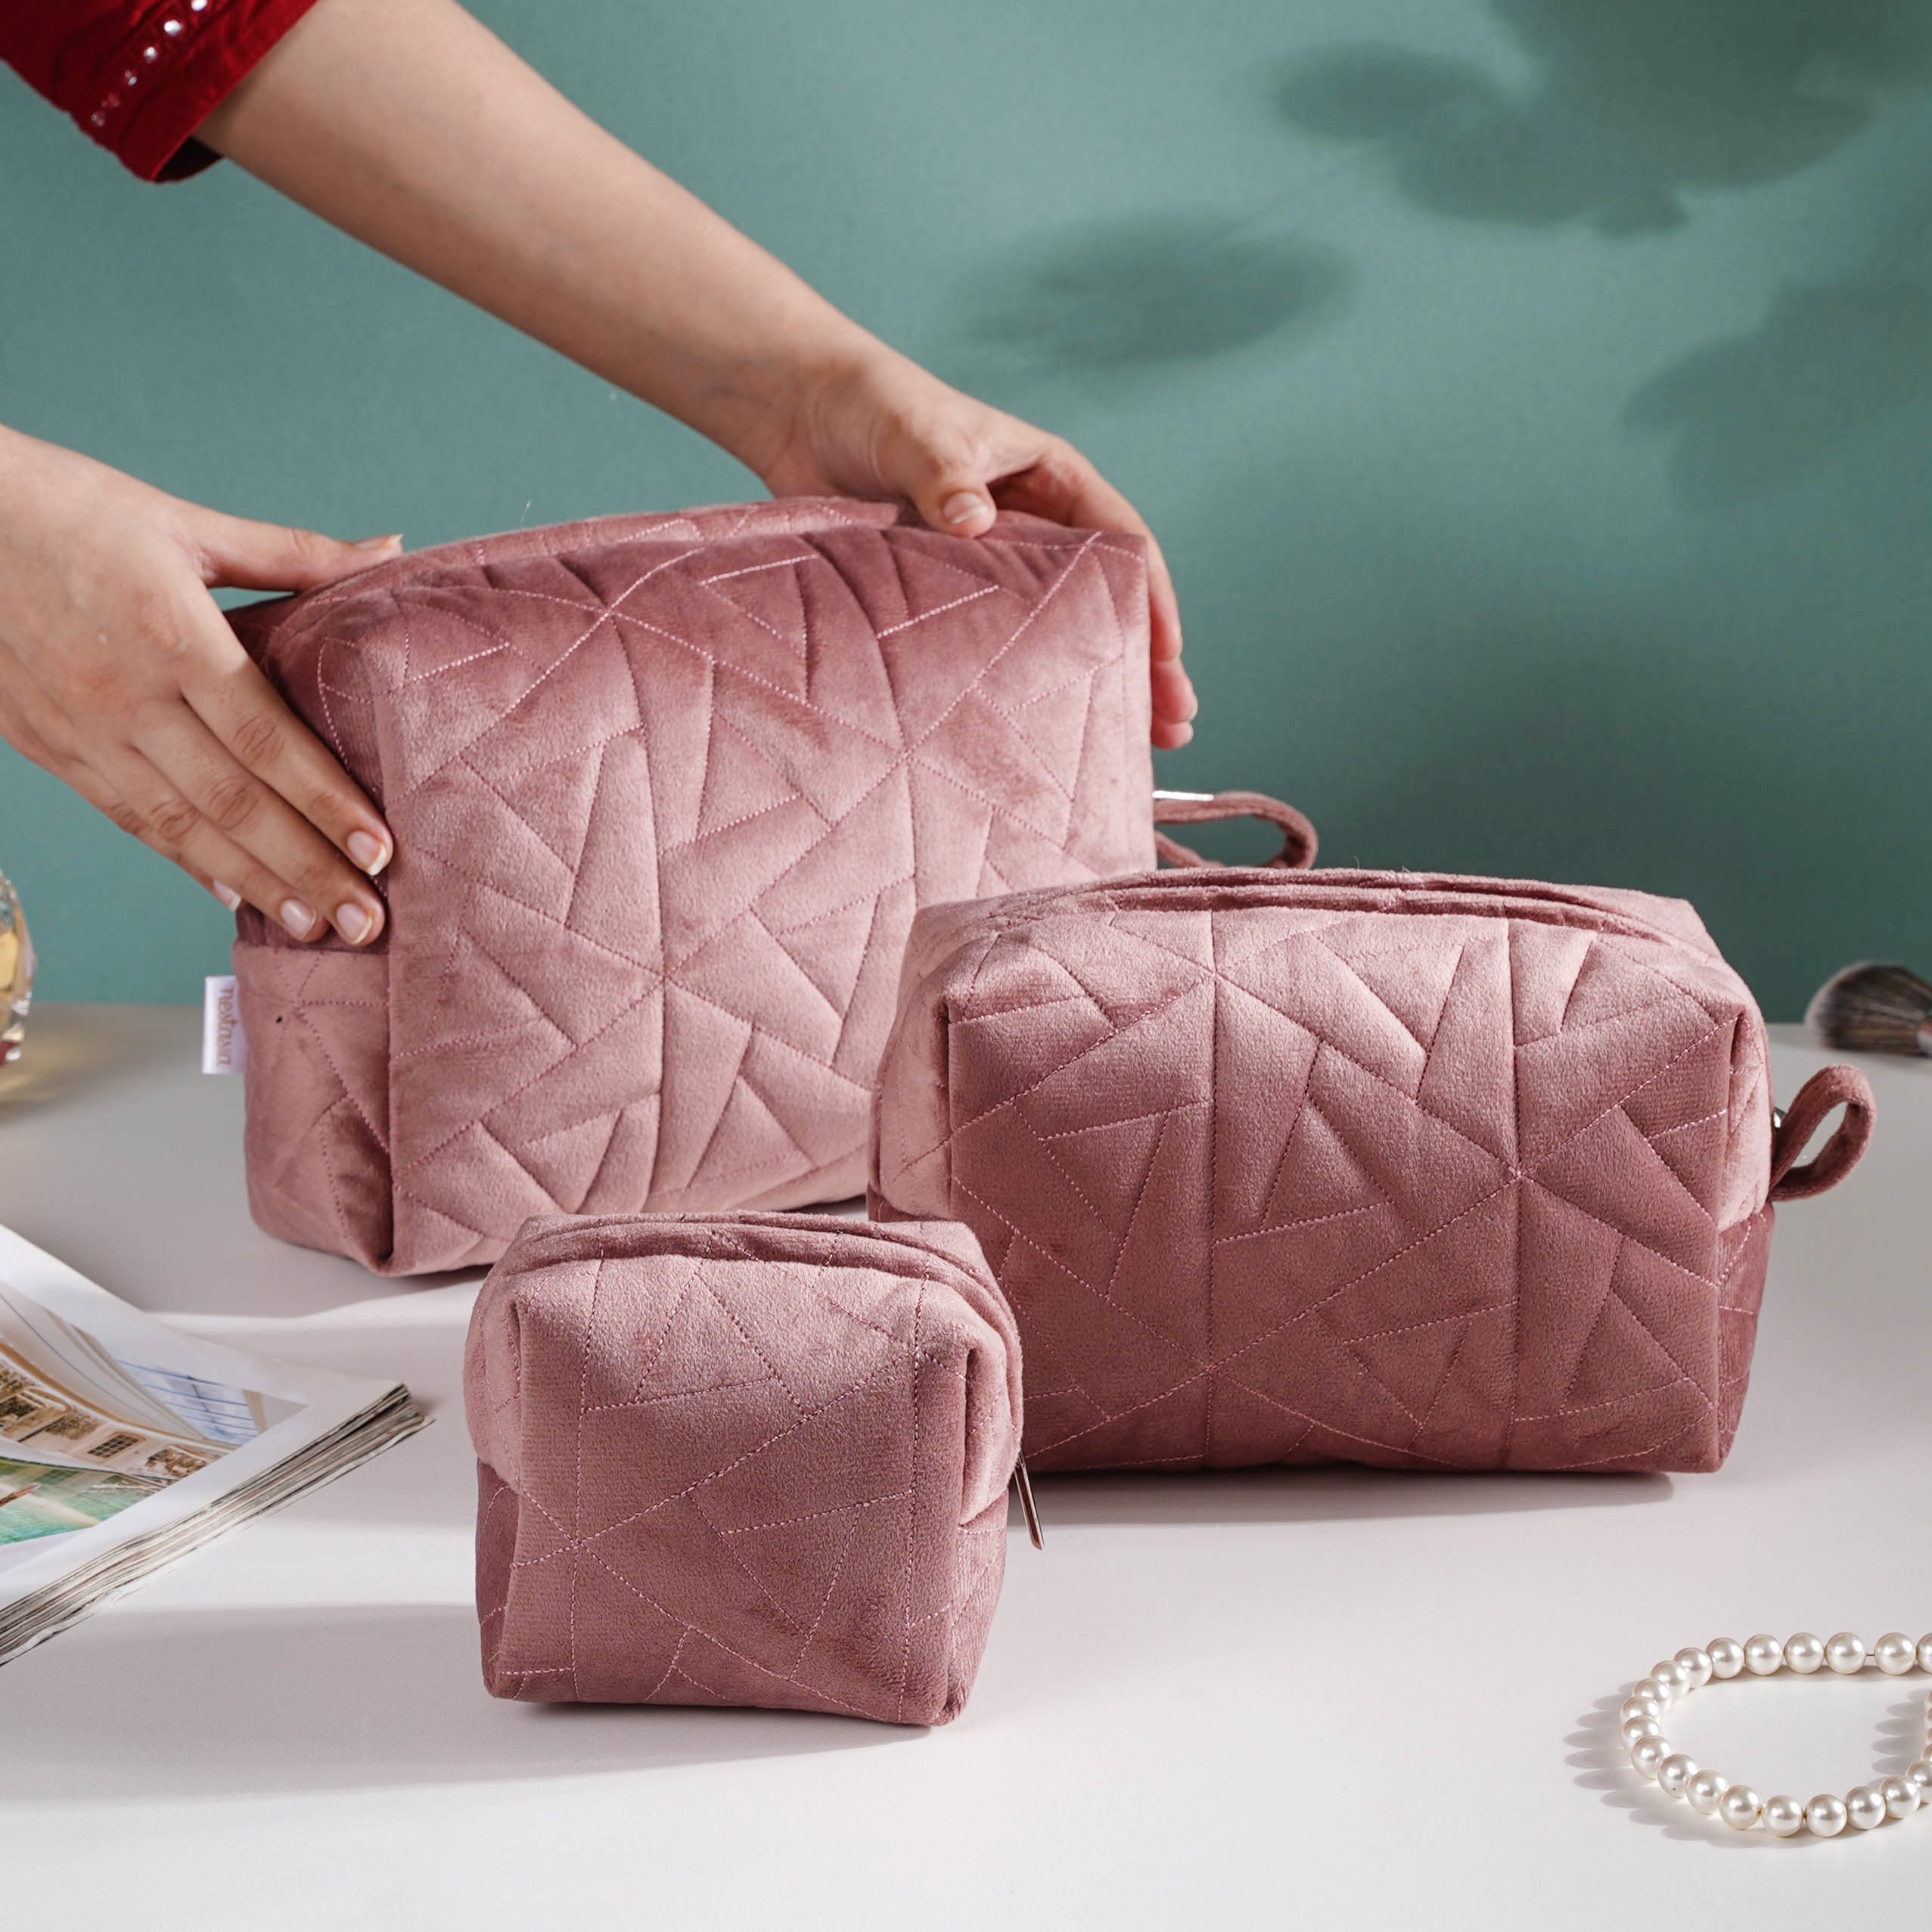 Shop Pink Cosmetic Bag Set Of 3 online in India